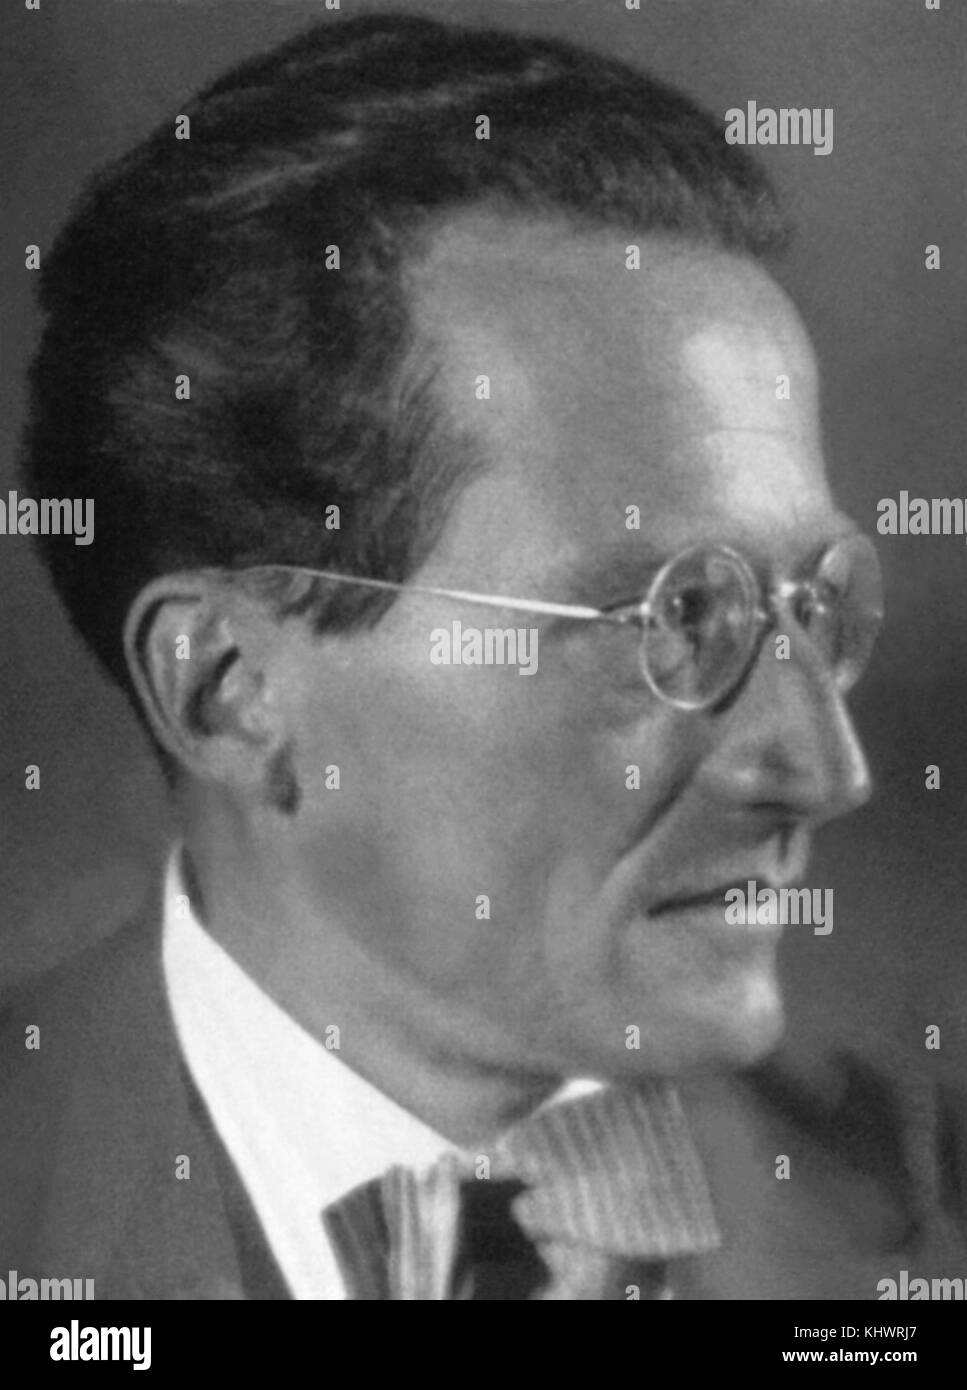 Dr. Erwin Schrödinger (1867-1961), Austrian physicist and winner of the Nobe Prize for Physics in 1933. Schrödinger developed a number of fundamental results in the field of quantum theory and is also known for his 'Schrödinger's cat' thought-experiment. Stock Photo